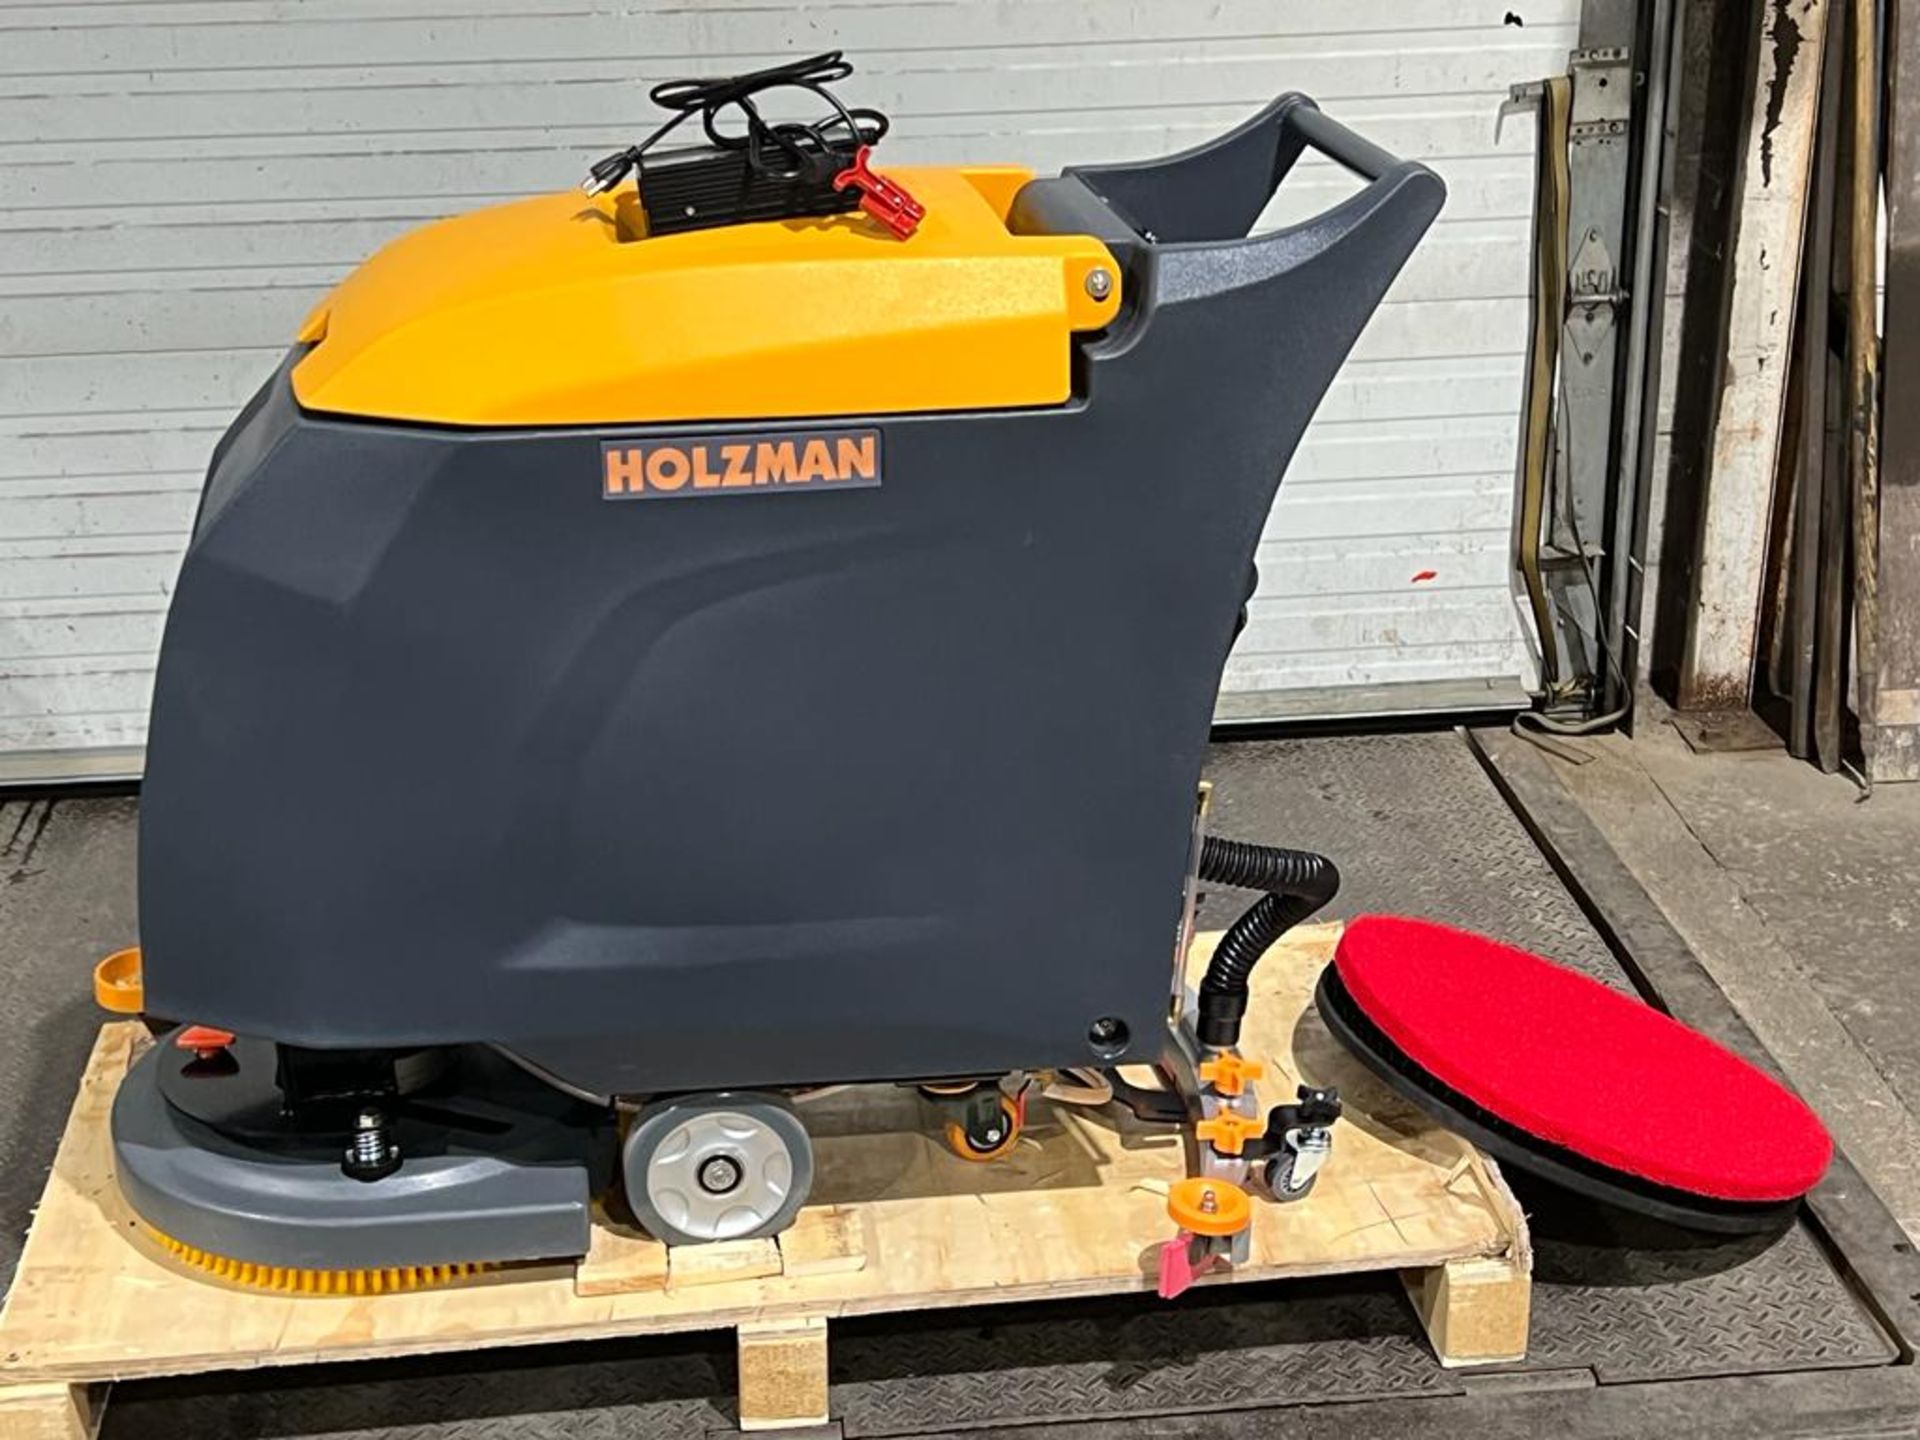 Holzman MINT Walk Behind Floor Sweeper Scrubber Unit model M50 - BRAND NEW with extra pads,